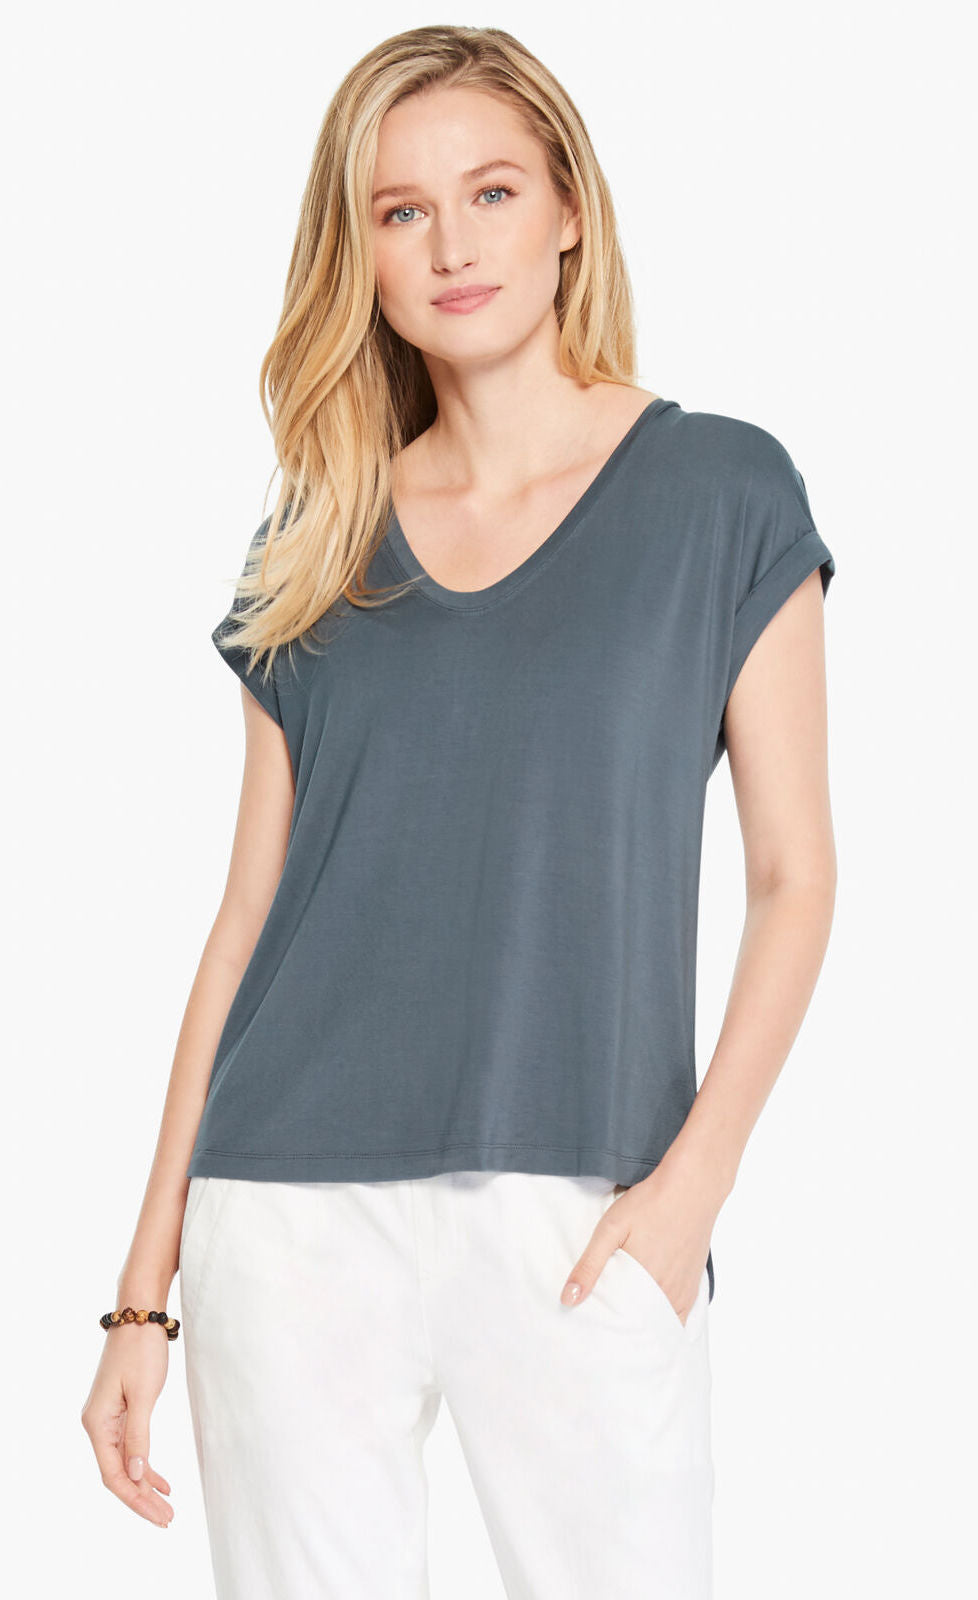 Front top half view of a woman wearing the Nic+Zoe Eaze V Tee. This tee is slate and has short sleeves and a v-neck.